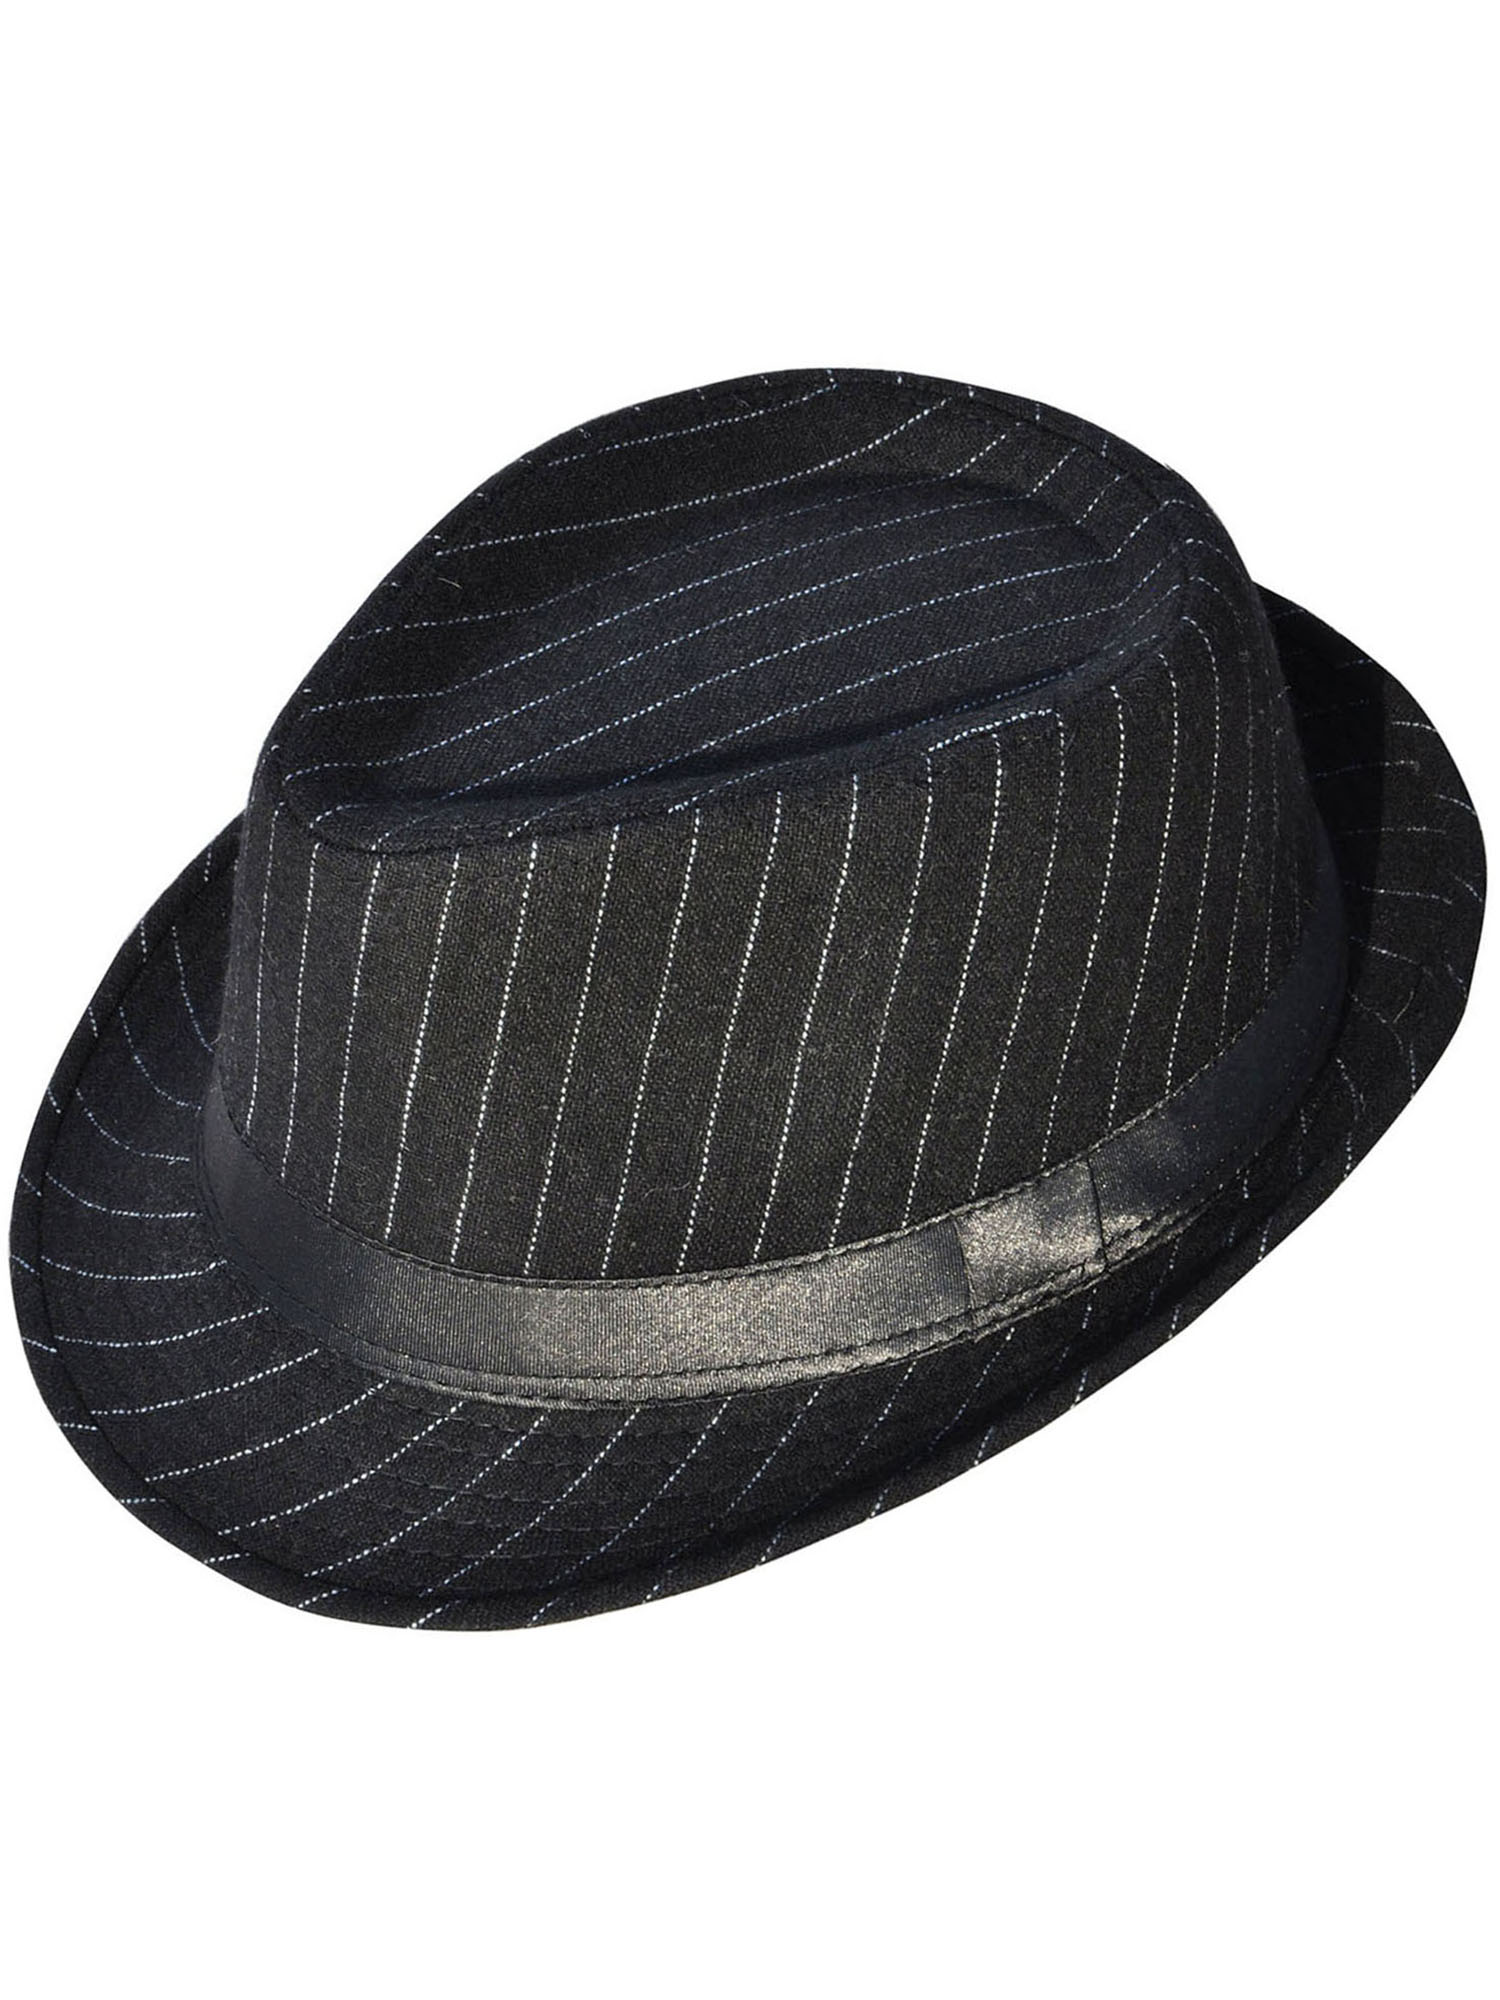 Mens Cool Fedora Trilby Hat Pinstripe with Black Band - image 1 of 4